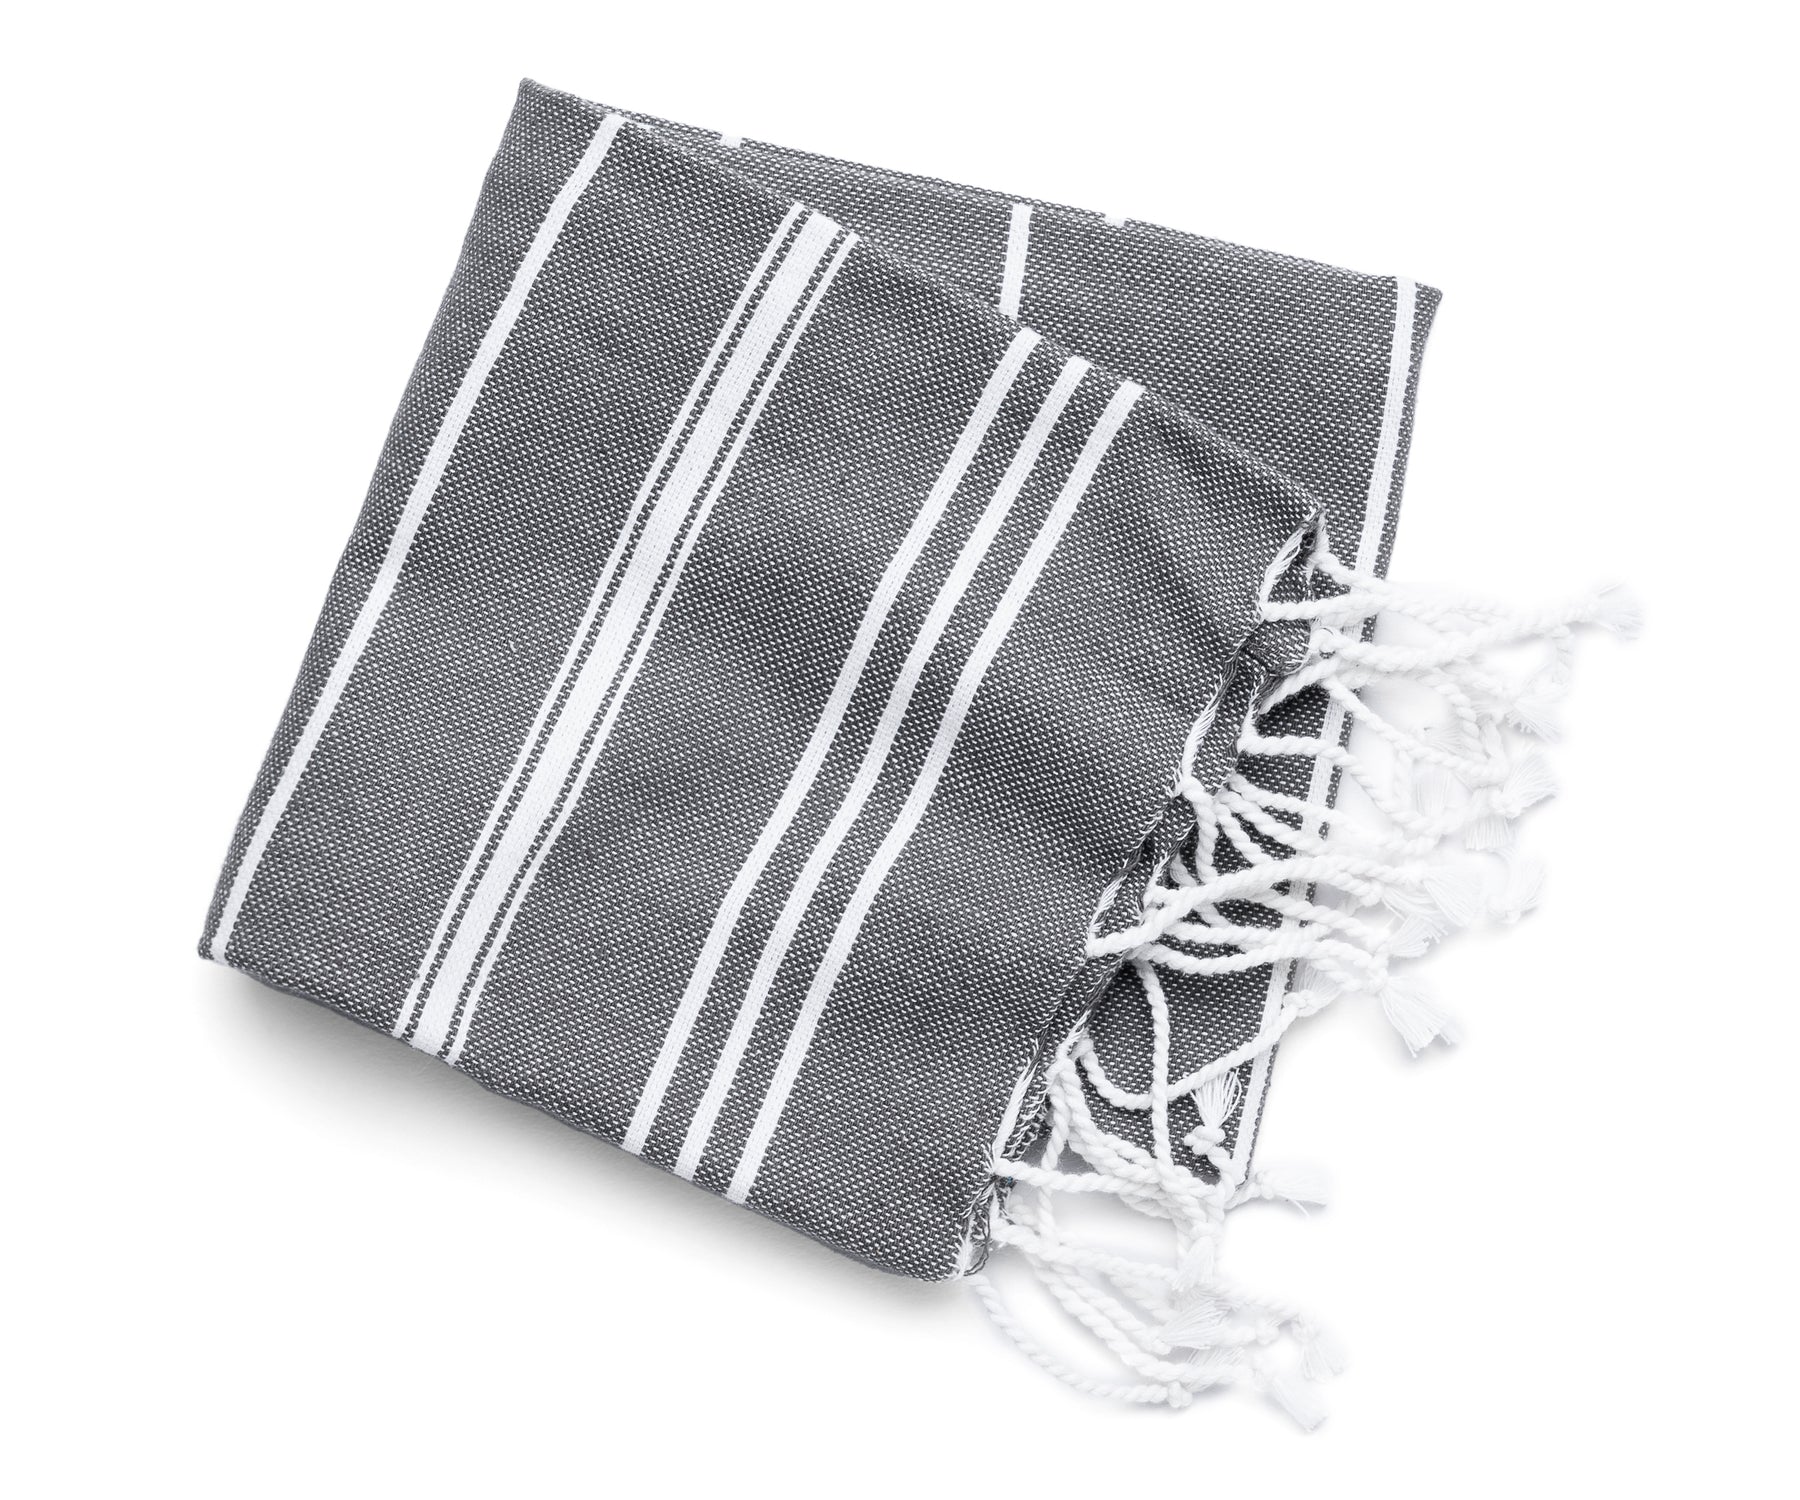 dish towels with fringe, hand towels with fringe, kitchen towels with fringe, kitchen towels for every holiday